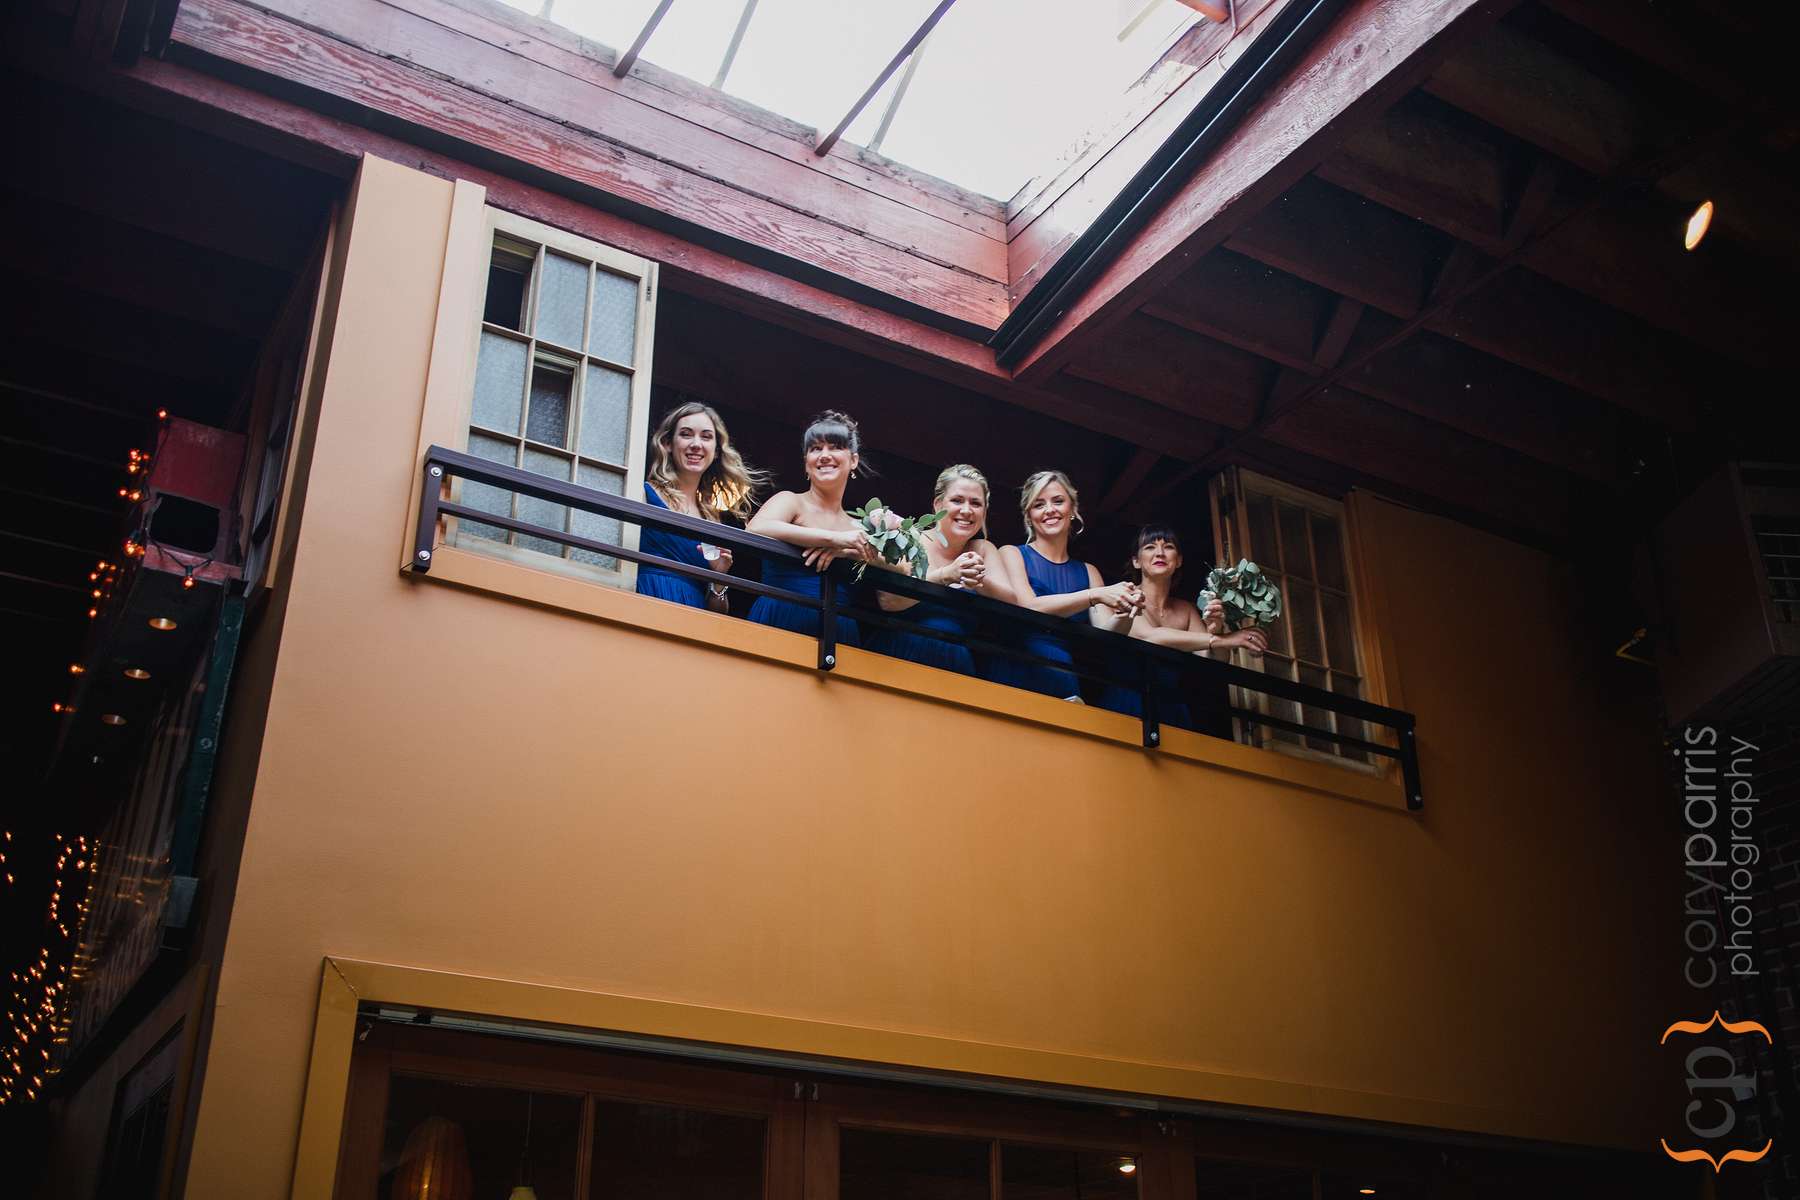  Bridesmaids looking down from the balcony. Photo by Alyssa Parris 